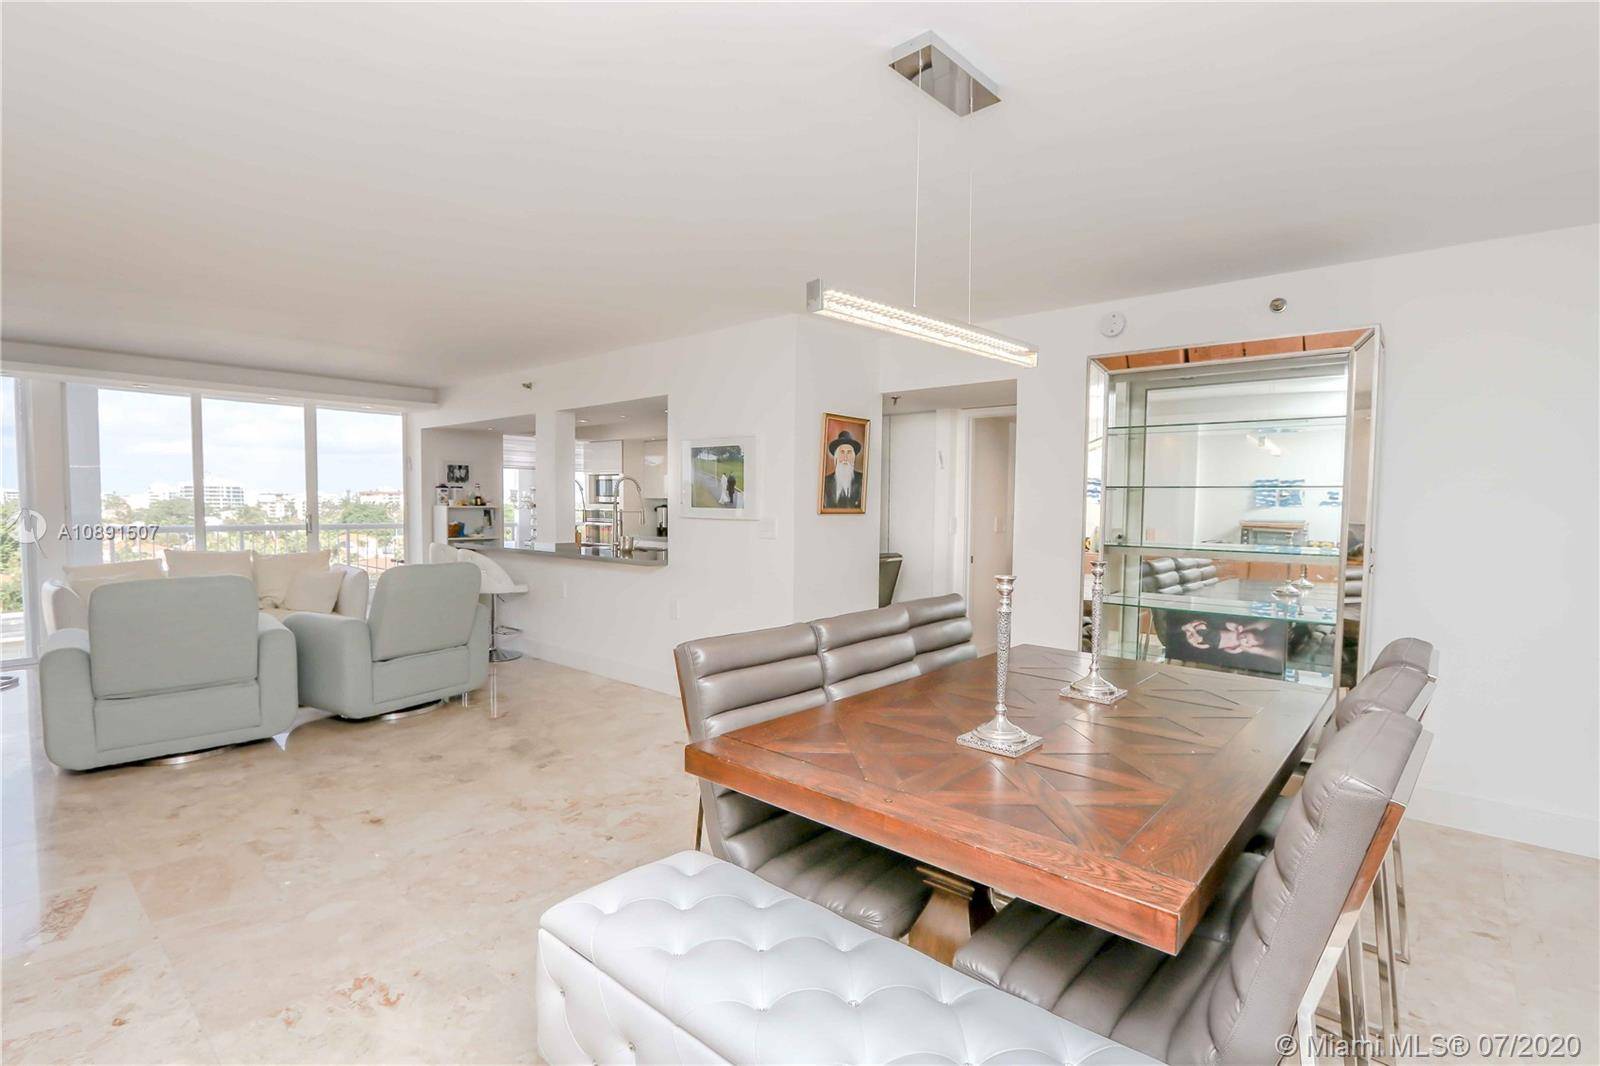 ON THE OCEAN, FULL RENOVATED 3 BEDROOM 2, 5 MARBLE BATHS, EXPANSIVE LIVING DINING ROOM OVERLOOKING FANTASTIC OVERSIZE WRAP AROUND BALCONY WITH CITY OCEAN VIEWS.